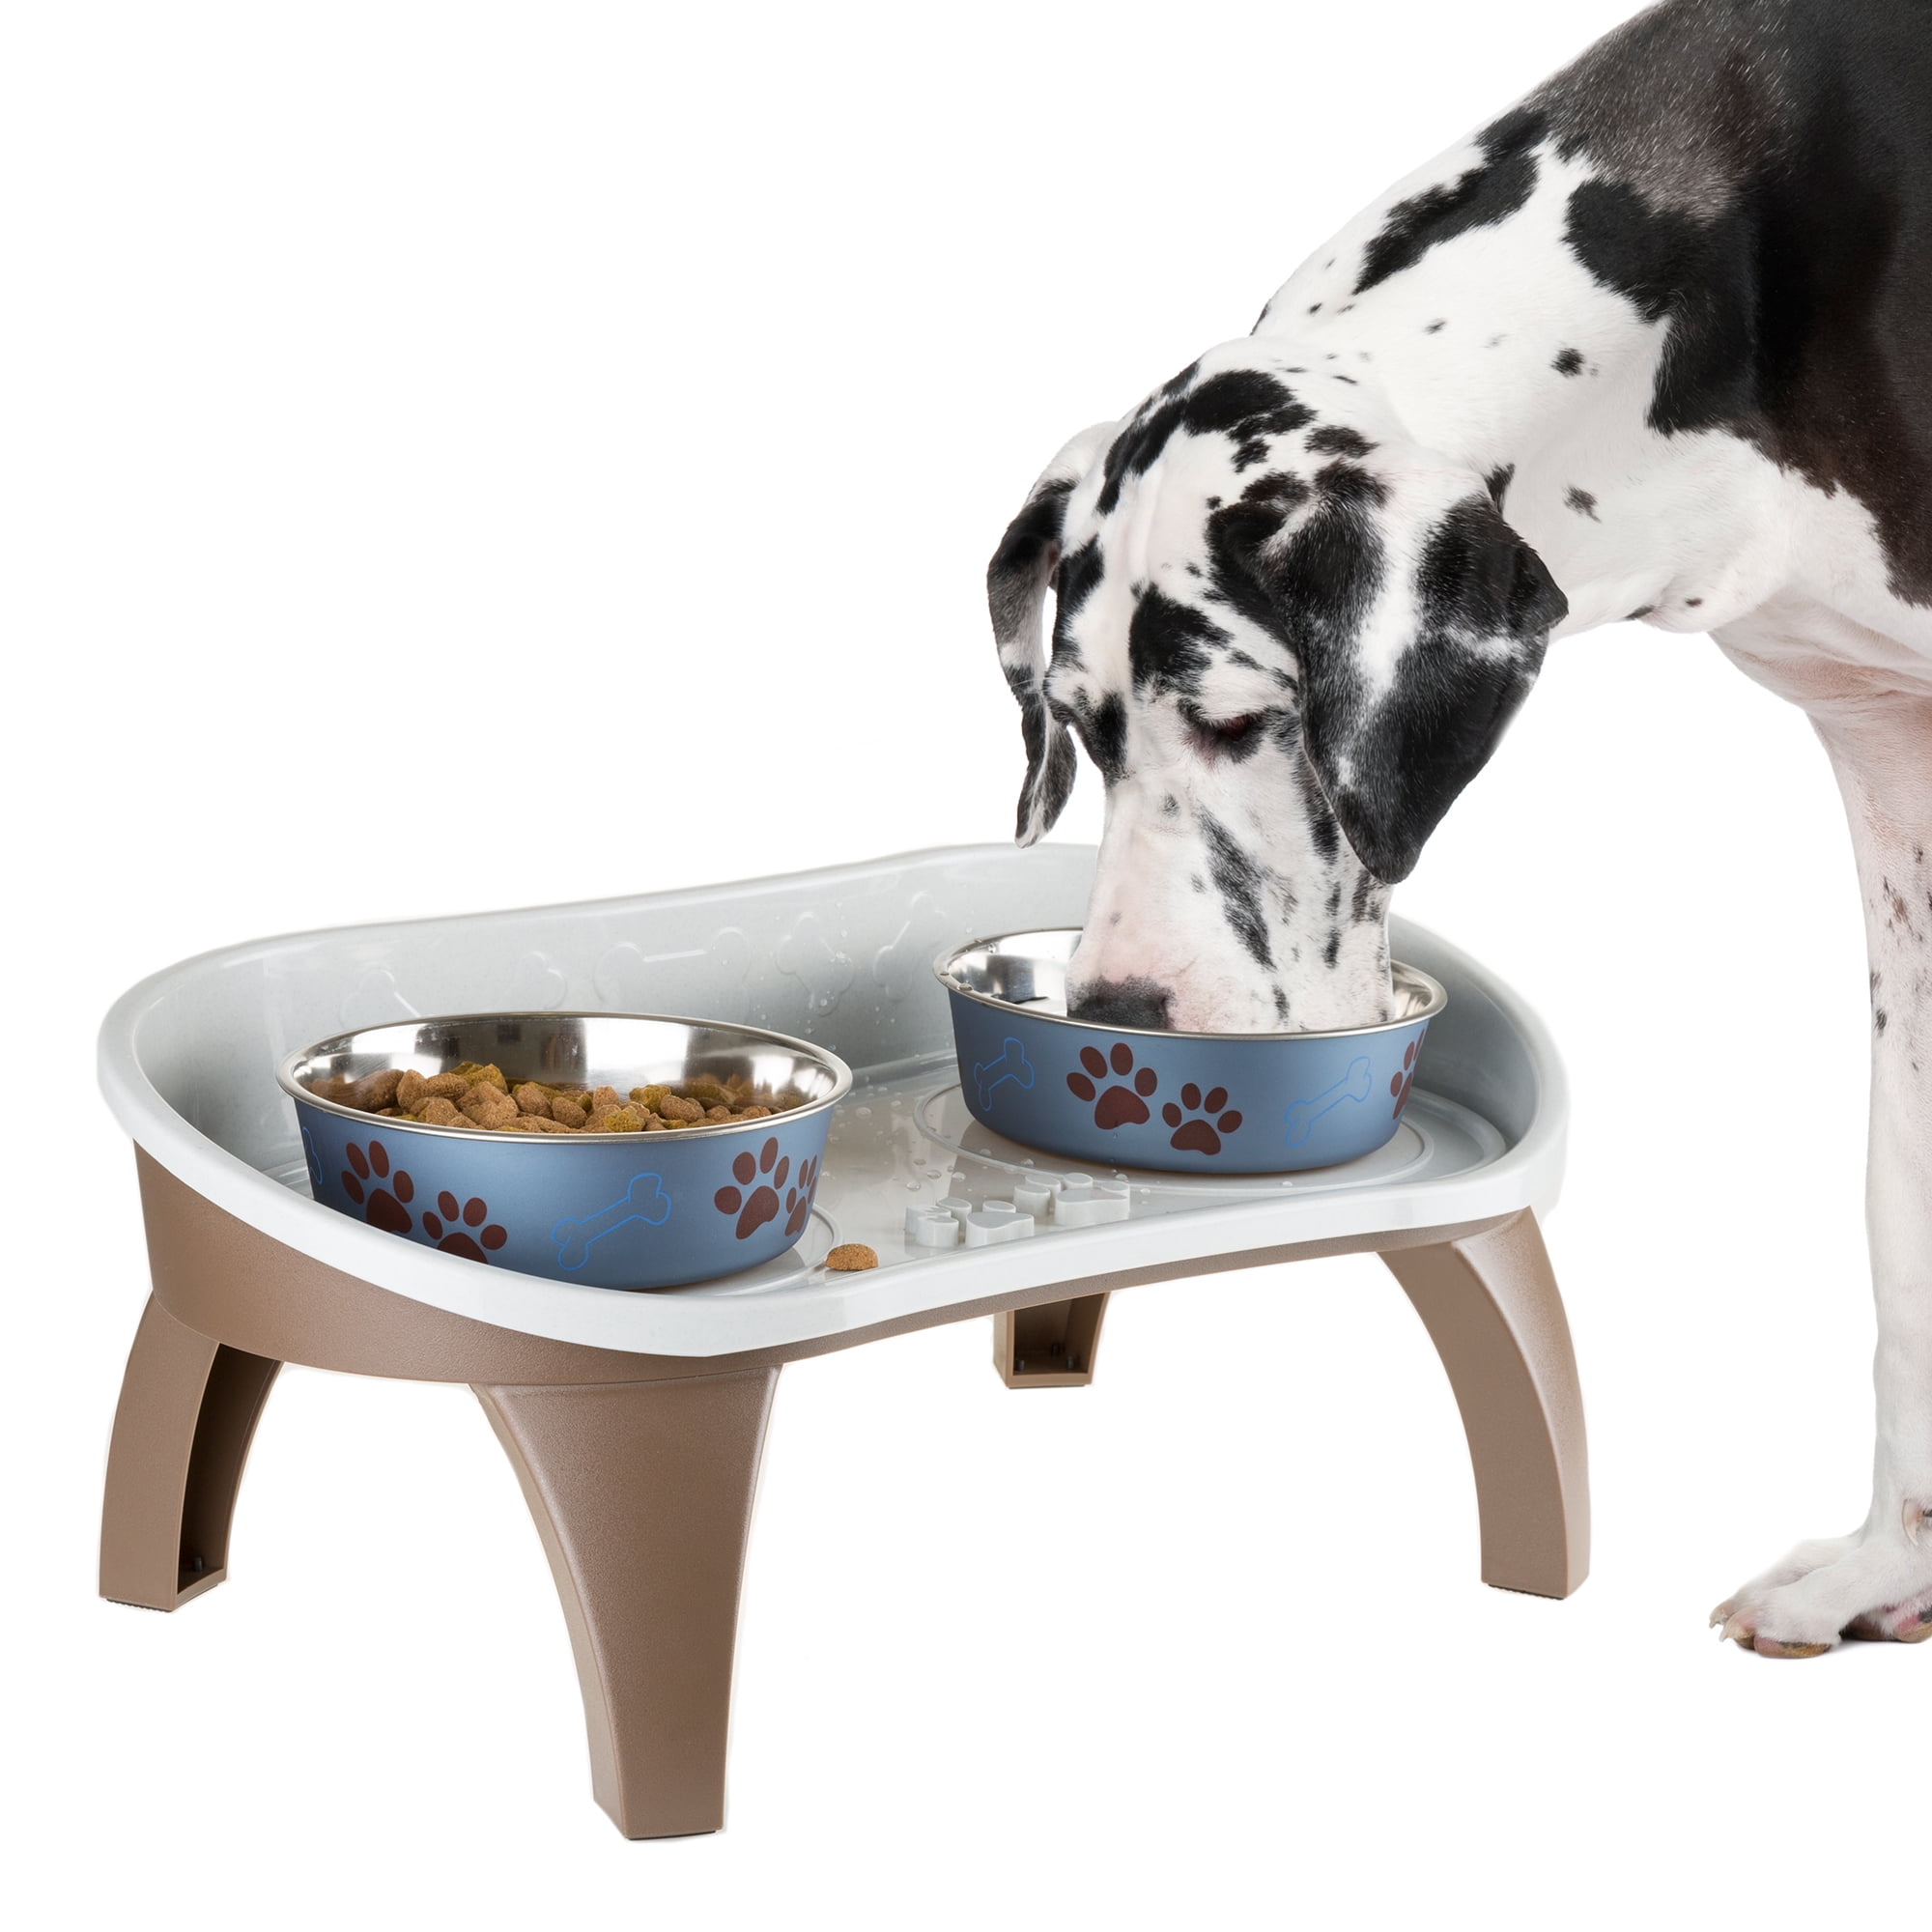 BOWLS FOR DOGS TO BE HUNG ON WALL FOOD STAND & FOOD STAND MAXI, Bama Pet